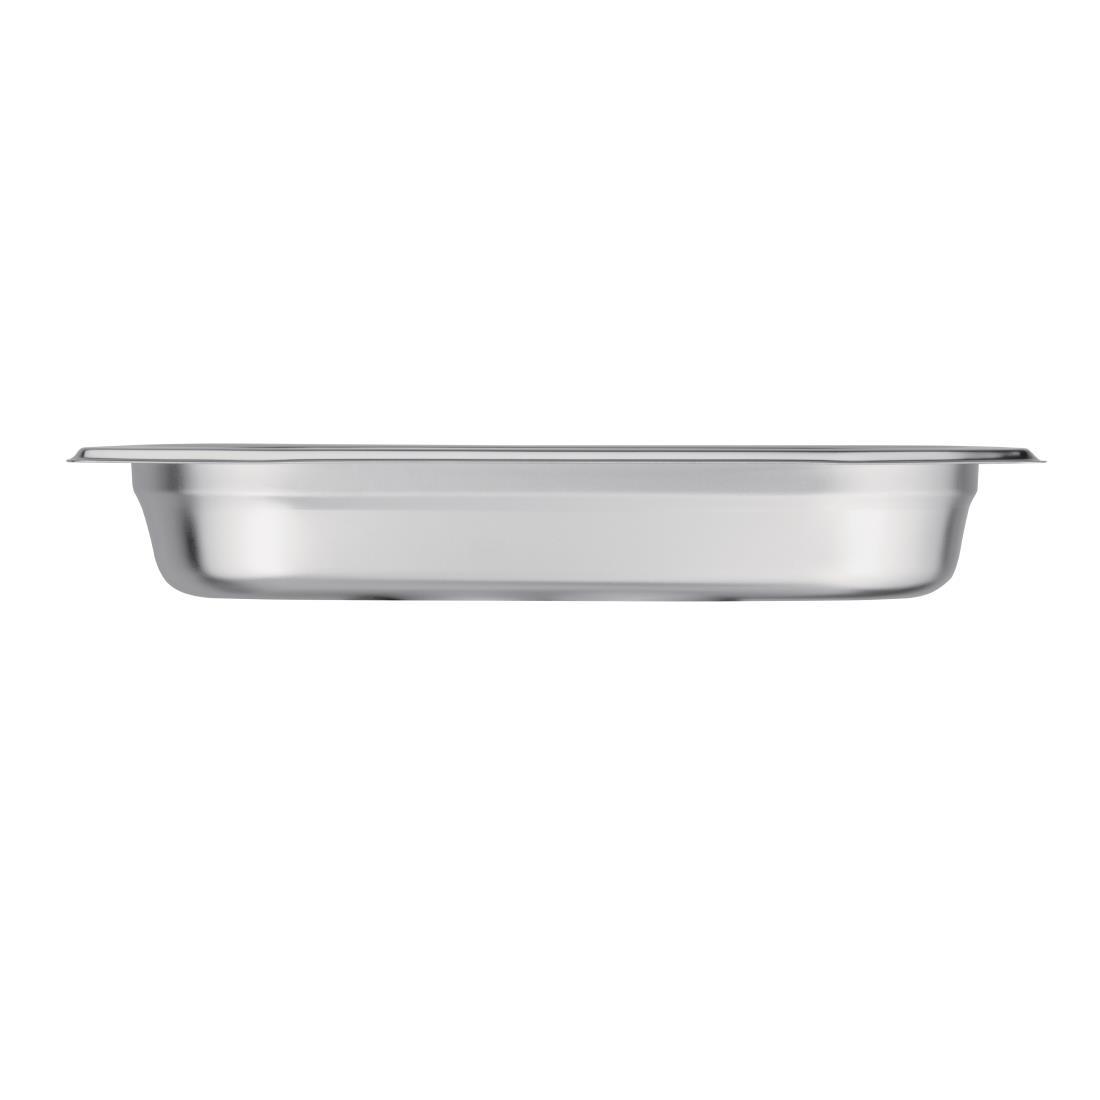 Vogue Stainless Steel 1/4 Gastronorm Pan 40mm - GM313  - 4